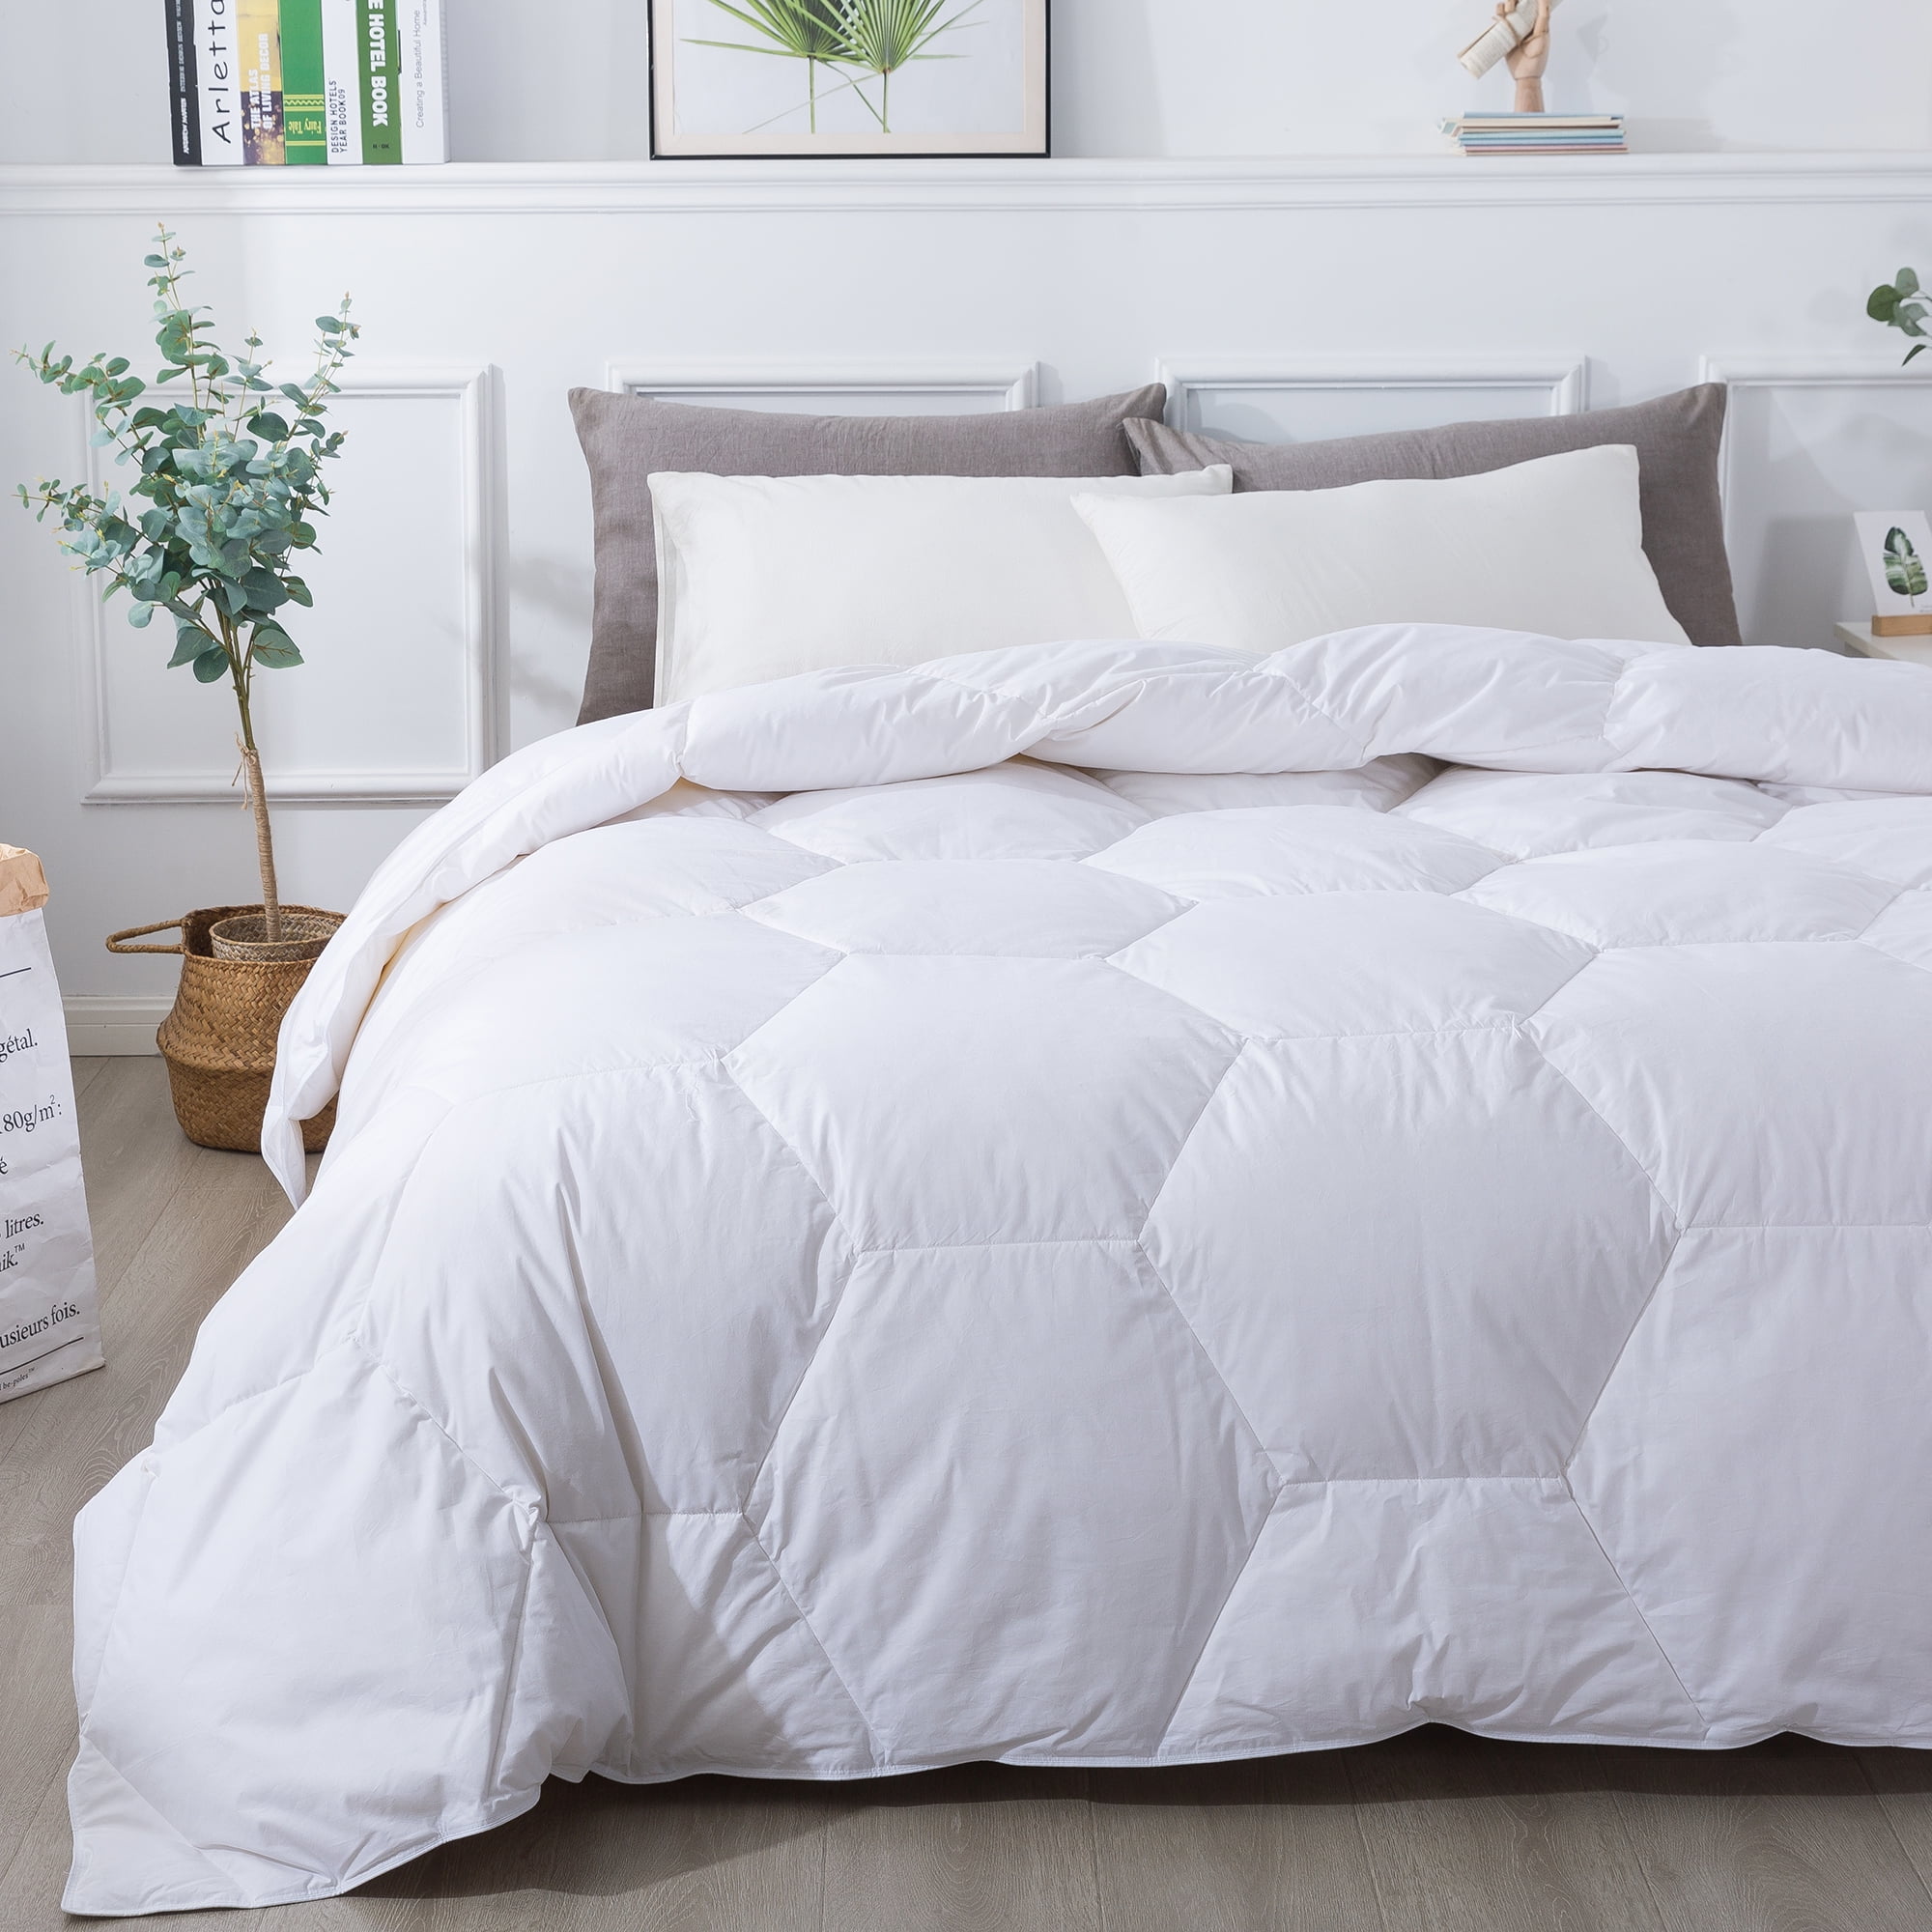 Details about   Attractive All Season Down Alternative Comforter Sage Solid US Full XL Size 